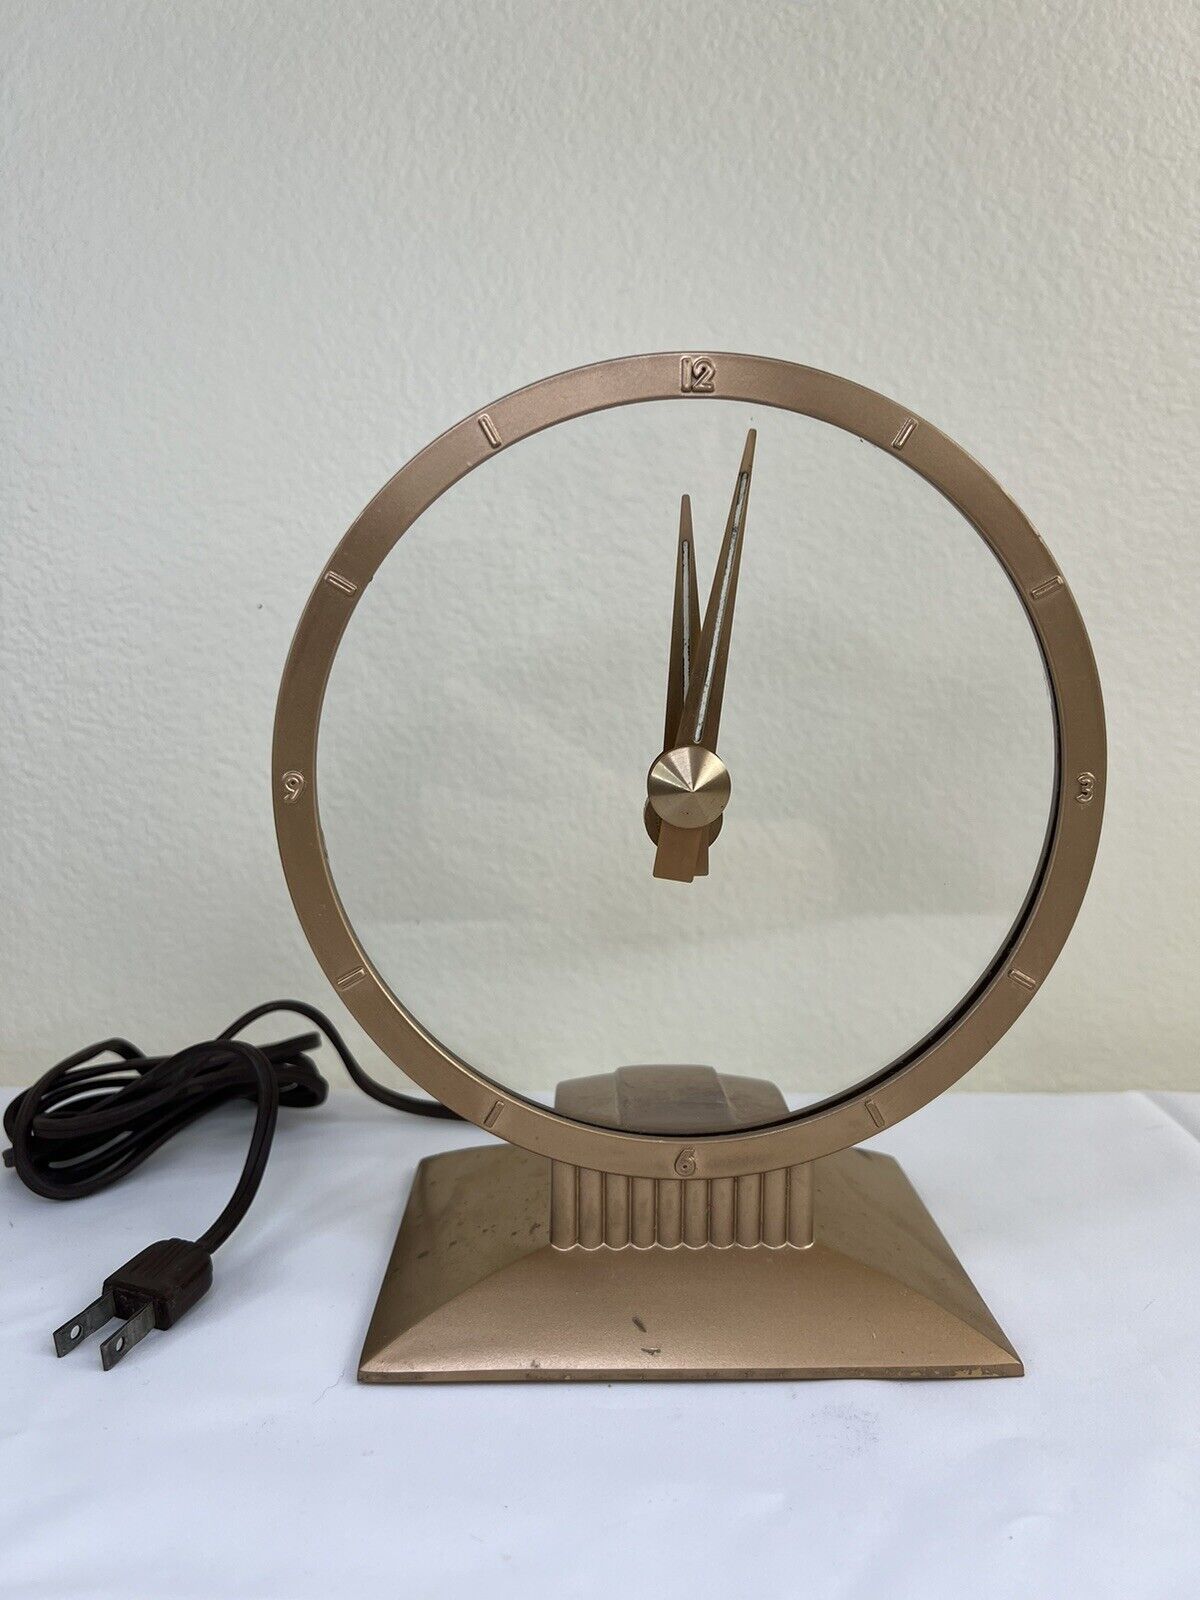 Vintage Jefferson Golden Hour Electric Mystery Clock 1950s Mid-Century Working